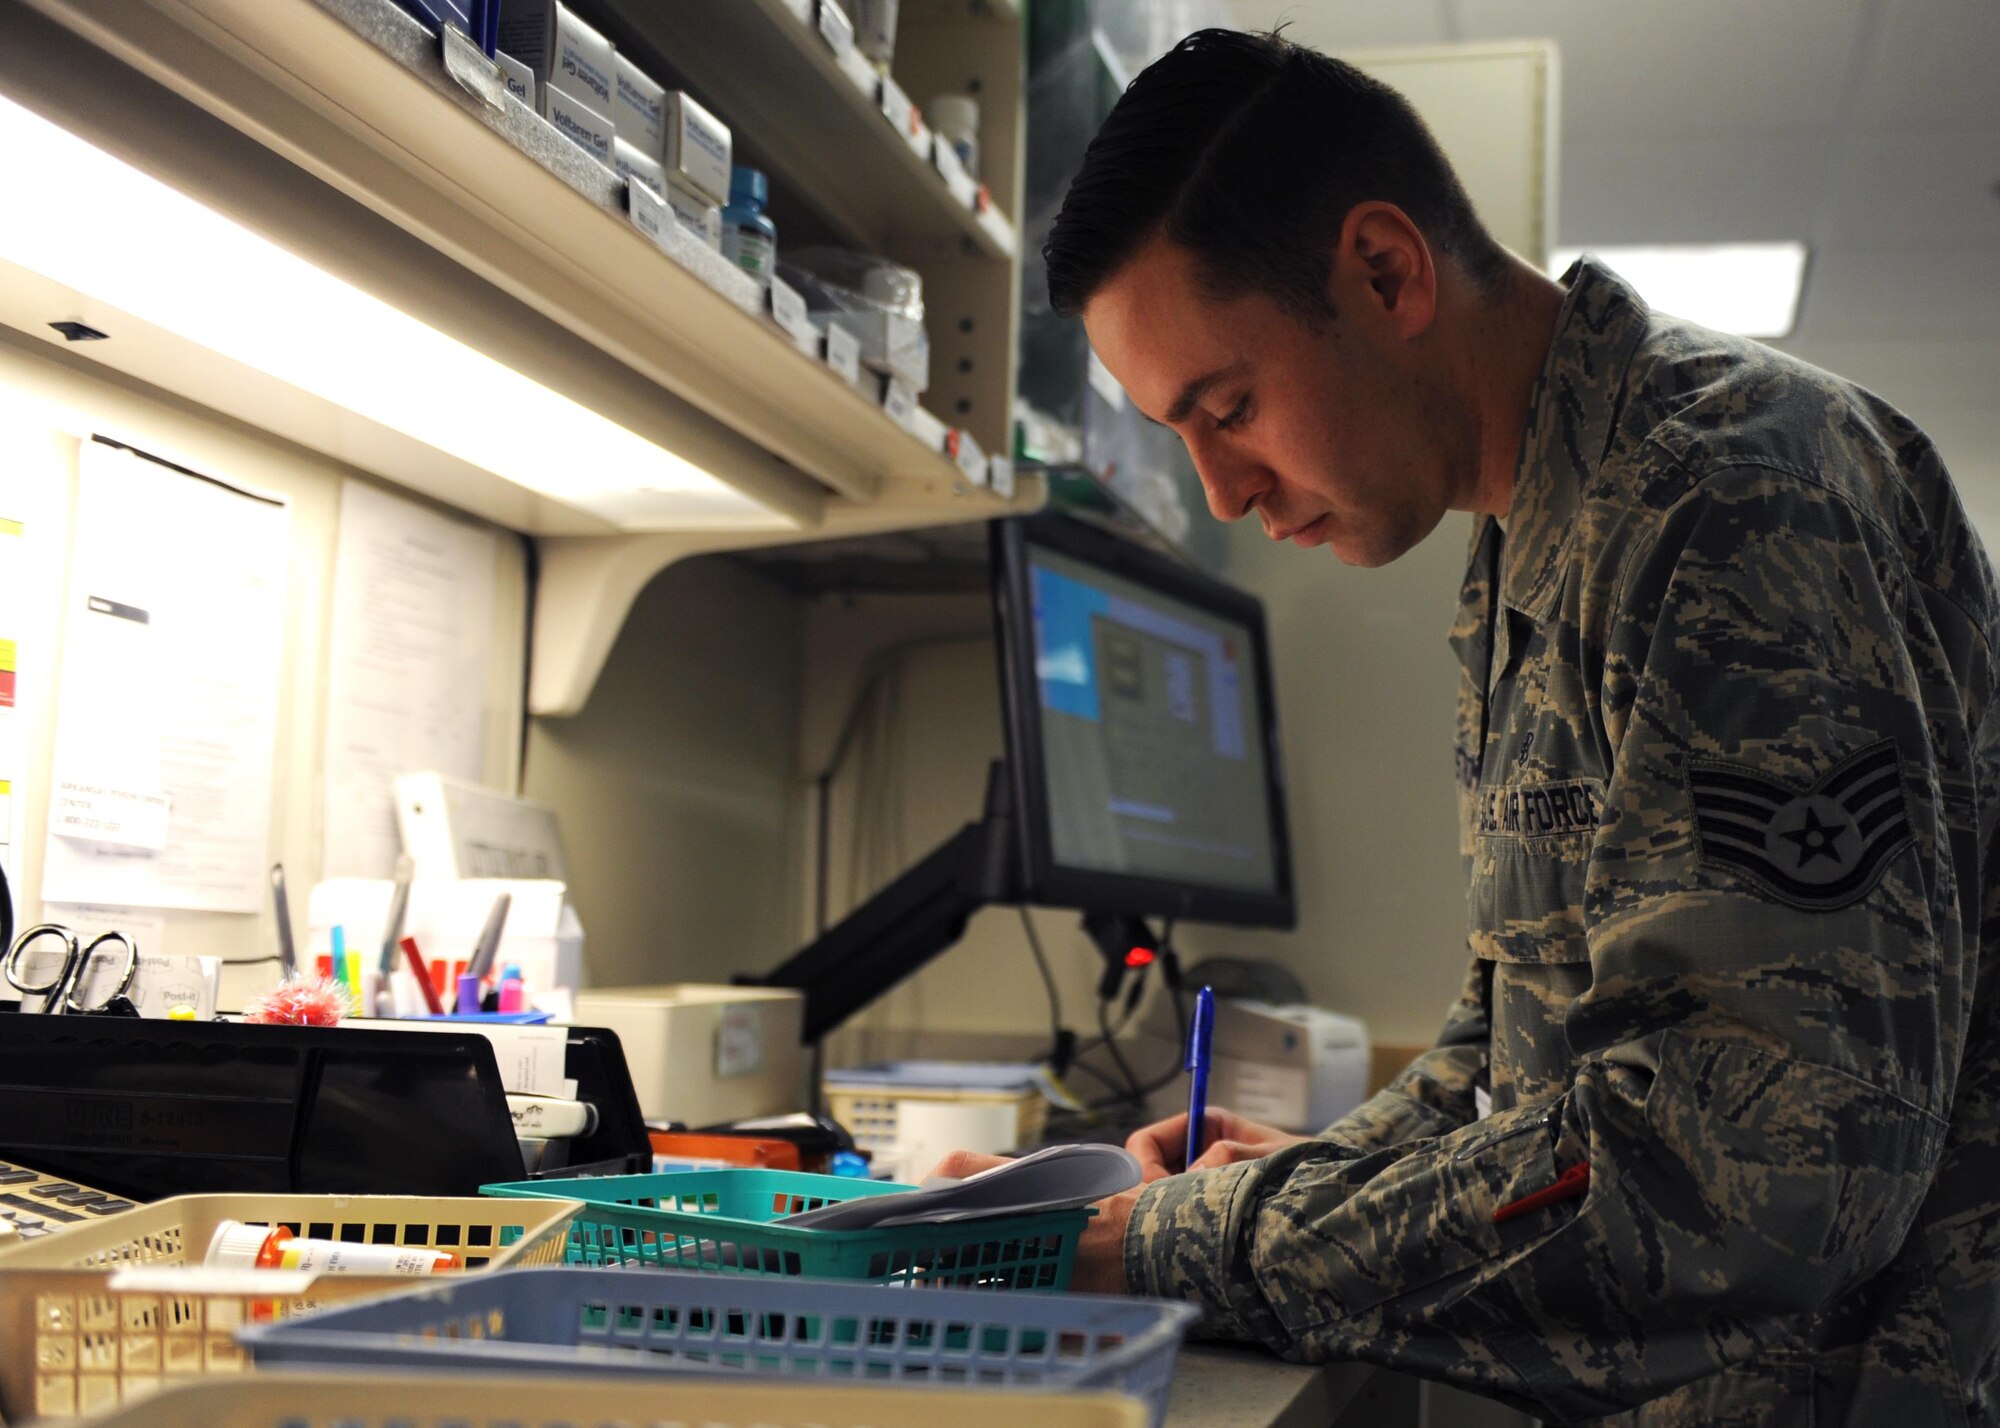 U.S. Air Force Staff Sgt. Zachary Nordstrom, 19th Medical Group pharmacy technician, inspects controlled medication Jan. 12, 2017, at the 19th MDG pharmacy on Little Rock Air Force Base, Ark. Controlled medication is meticulously inspected during prescription preparation to ensure quality assurance. (U.S. Air Force photo by Airman 1st Class Grace Nichols)